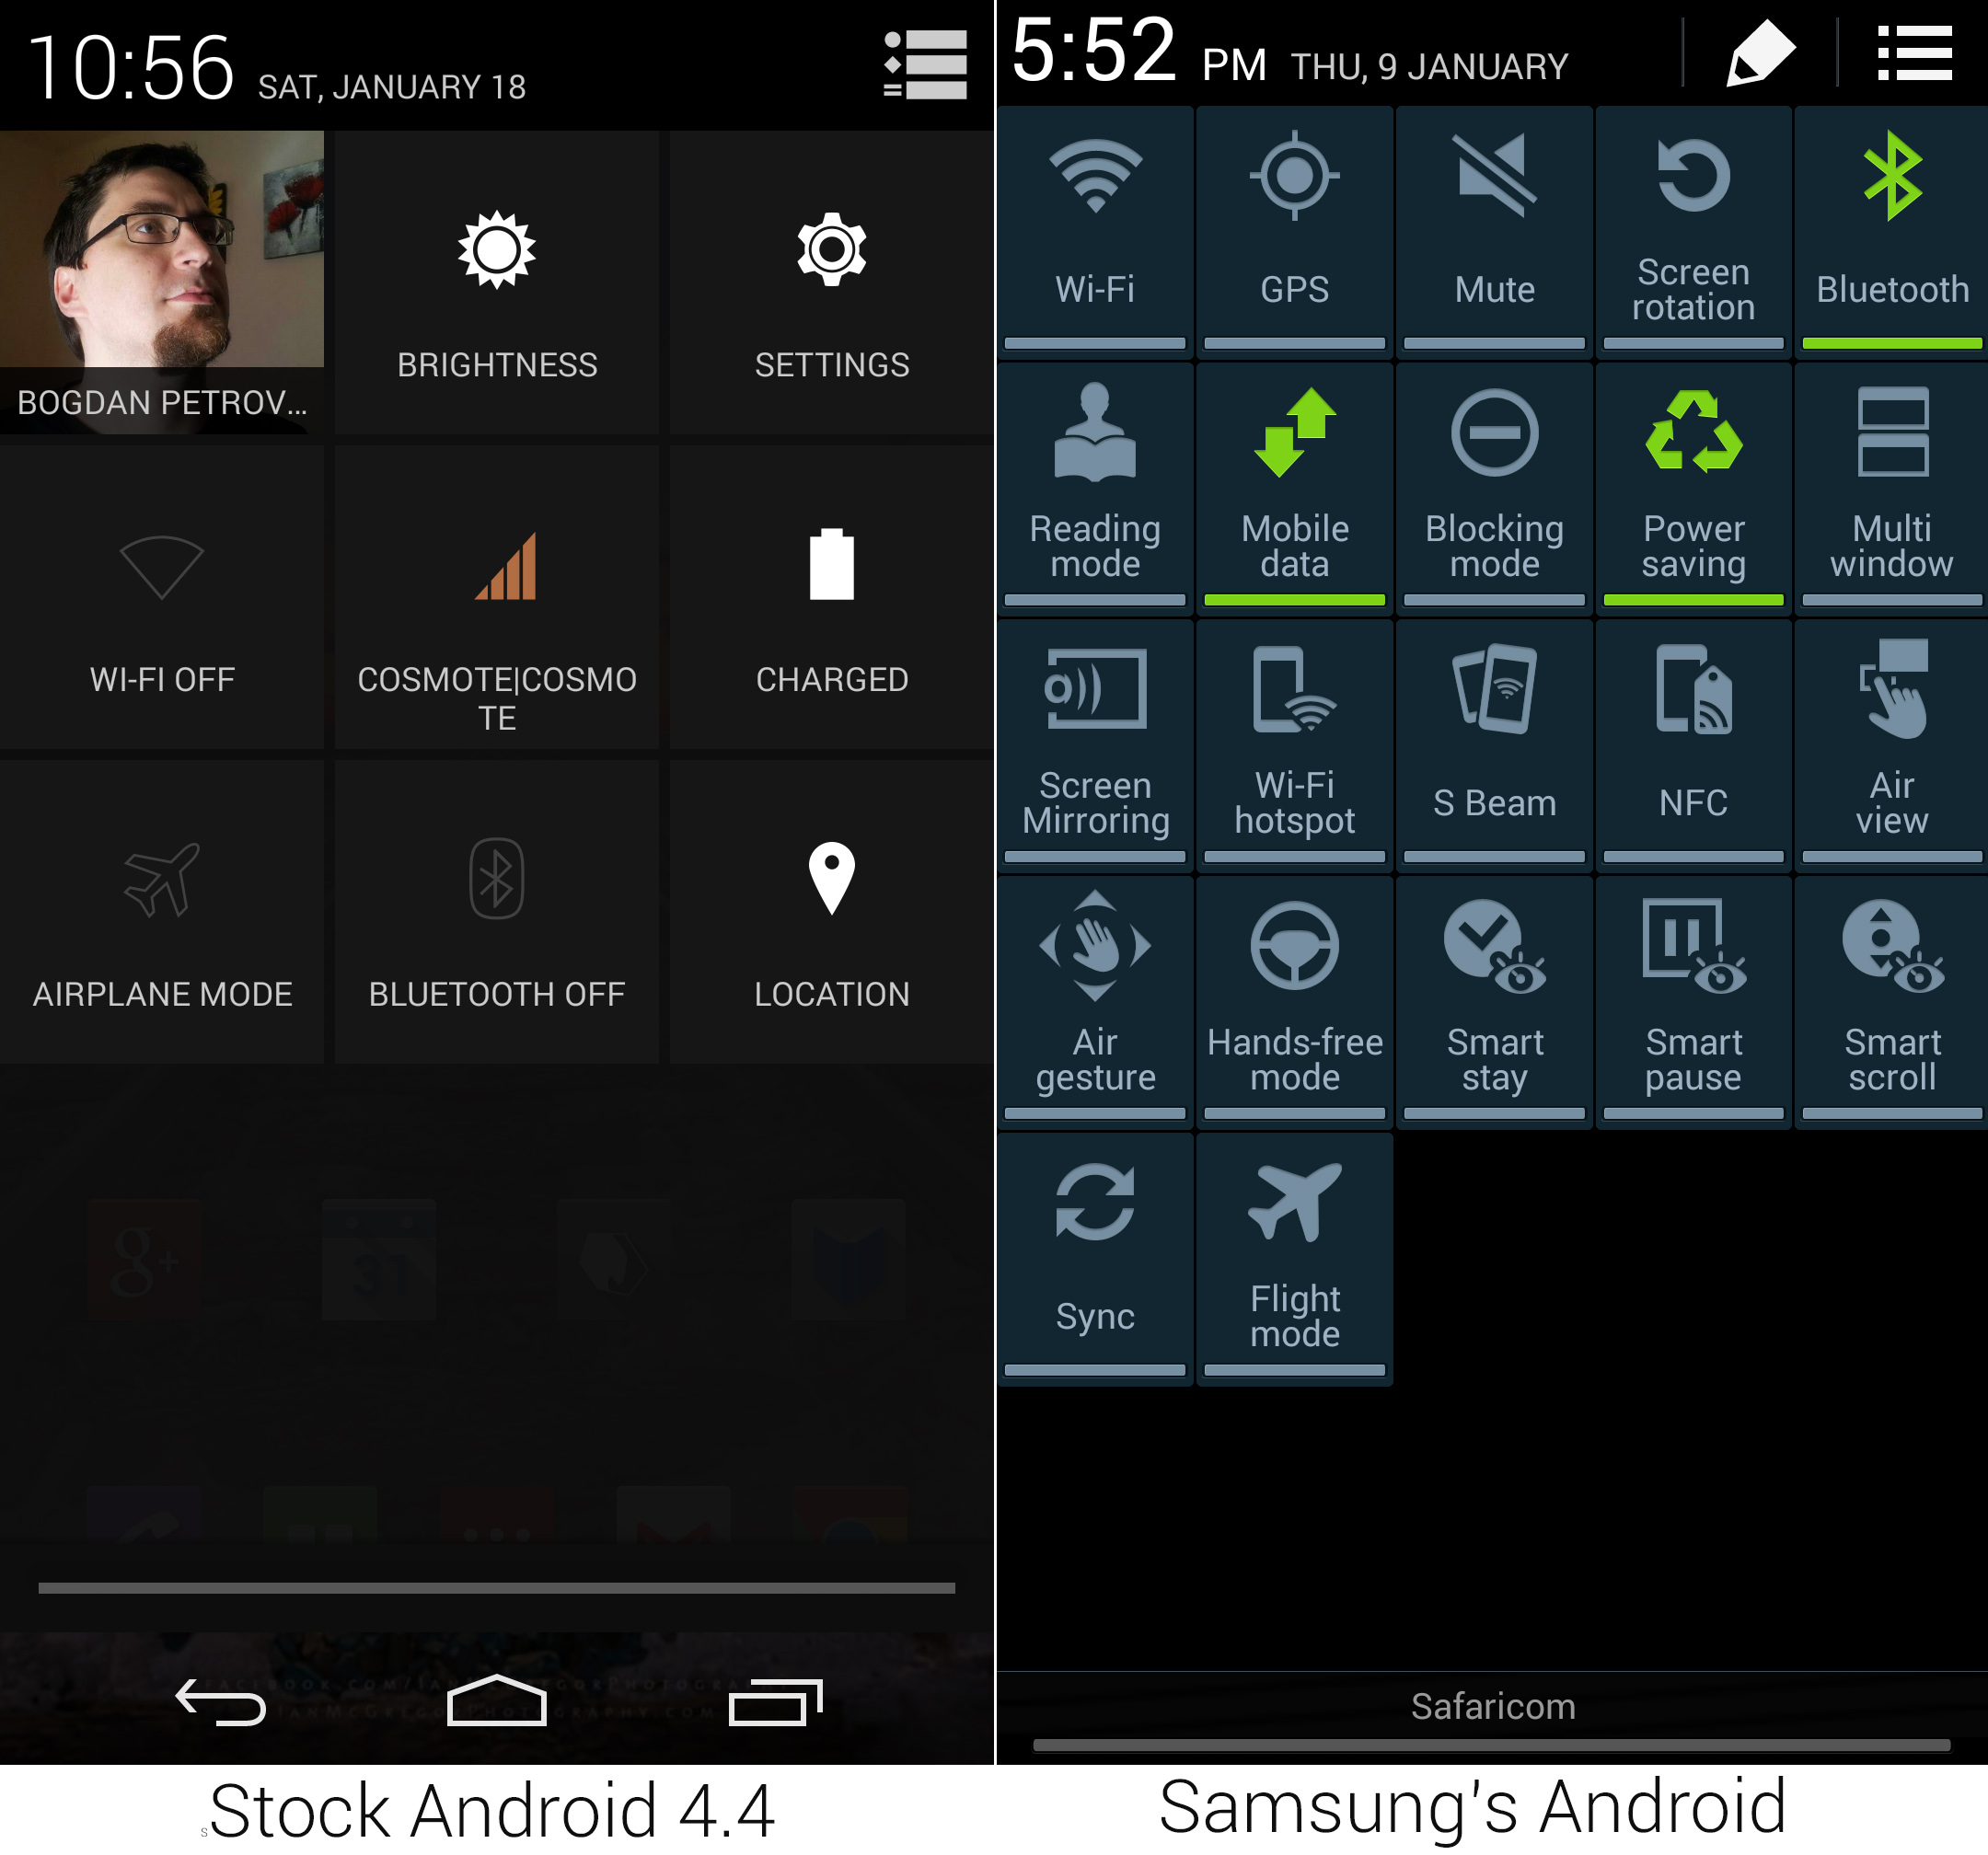 Stock Android 4.4 vs Samsung Touchwiz Galaxy Note 3 DropDown